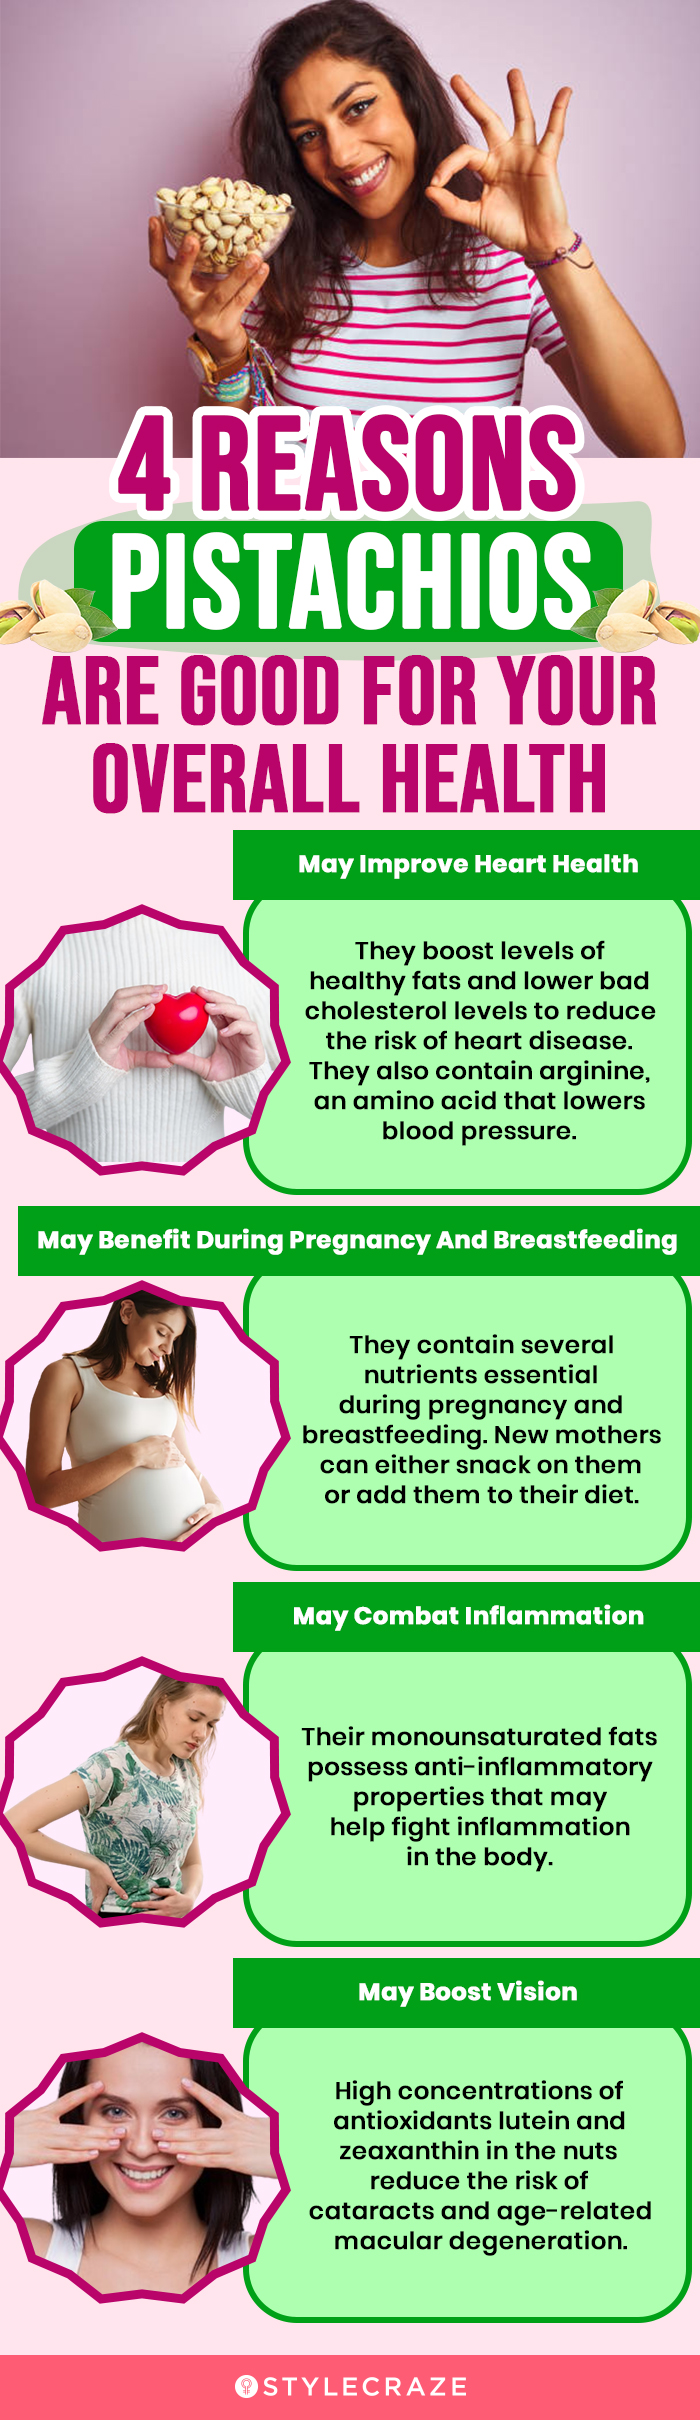 4 reasons pistachios are good for your overall health (infographic)